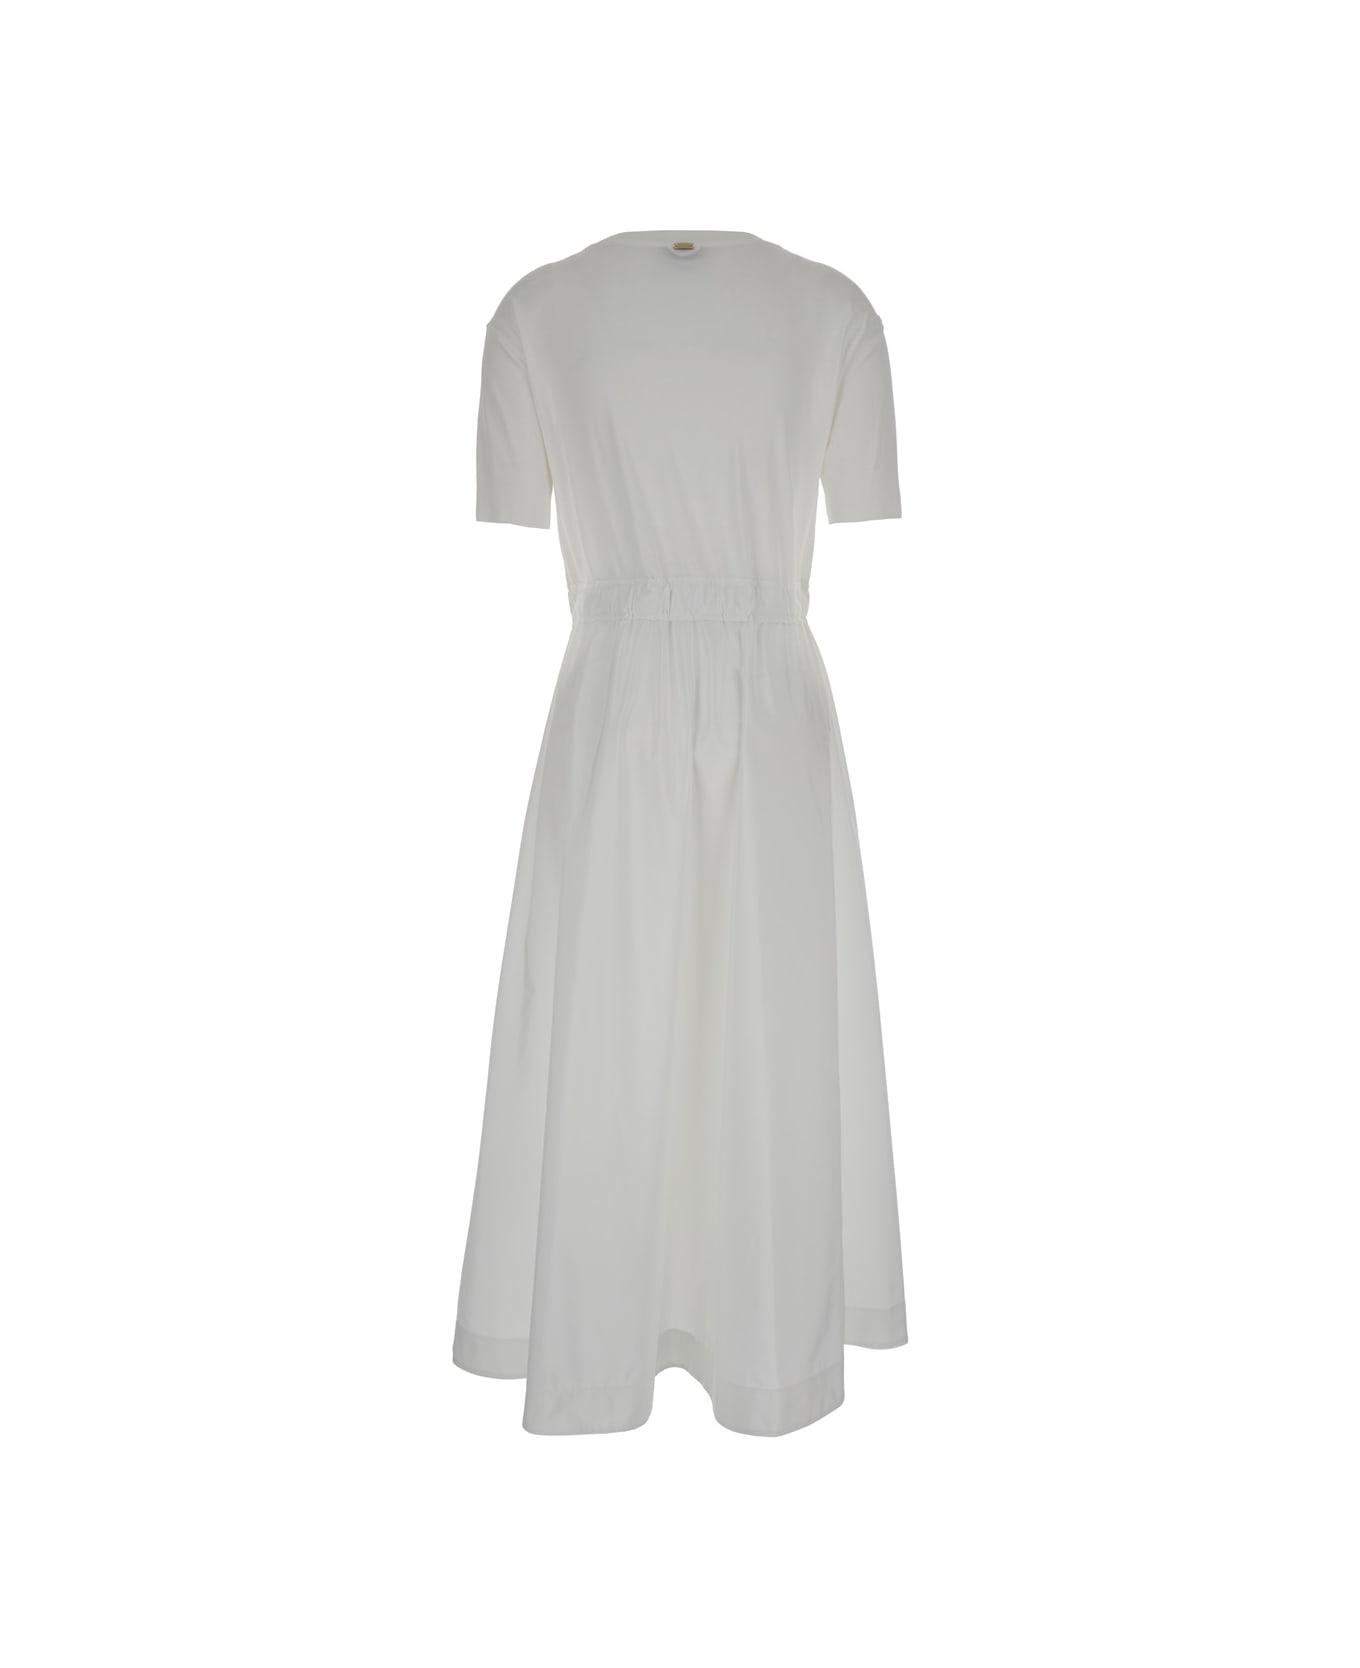 Herno Long White Dress With Branded Drawstring In Cotton Blend Woman - White